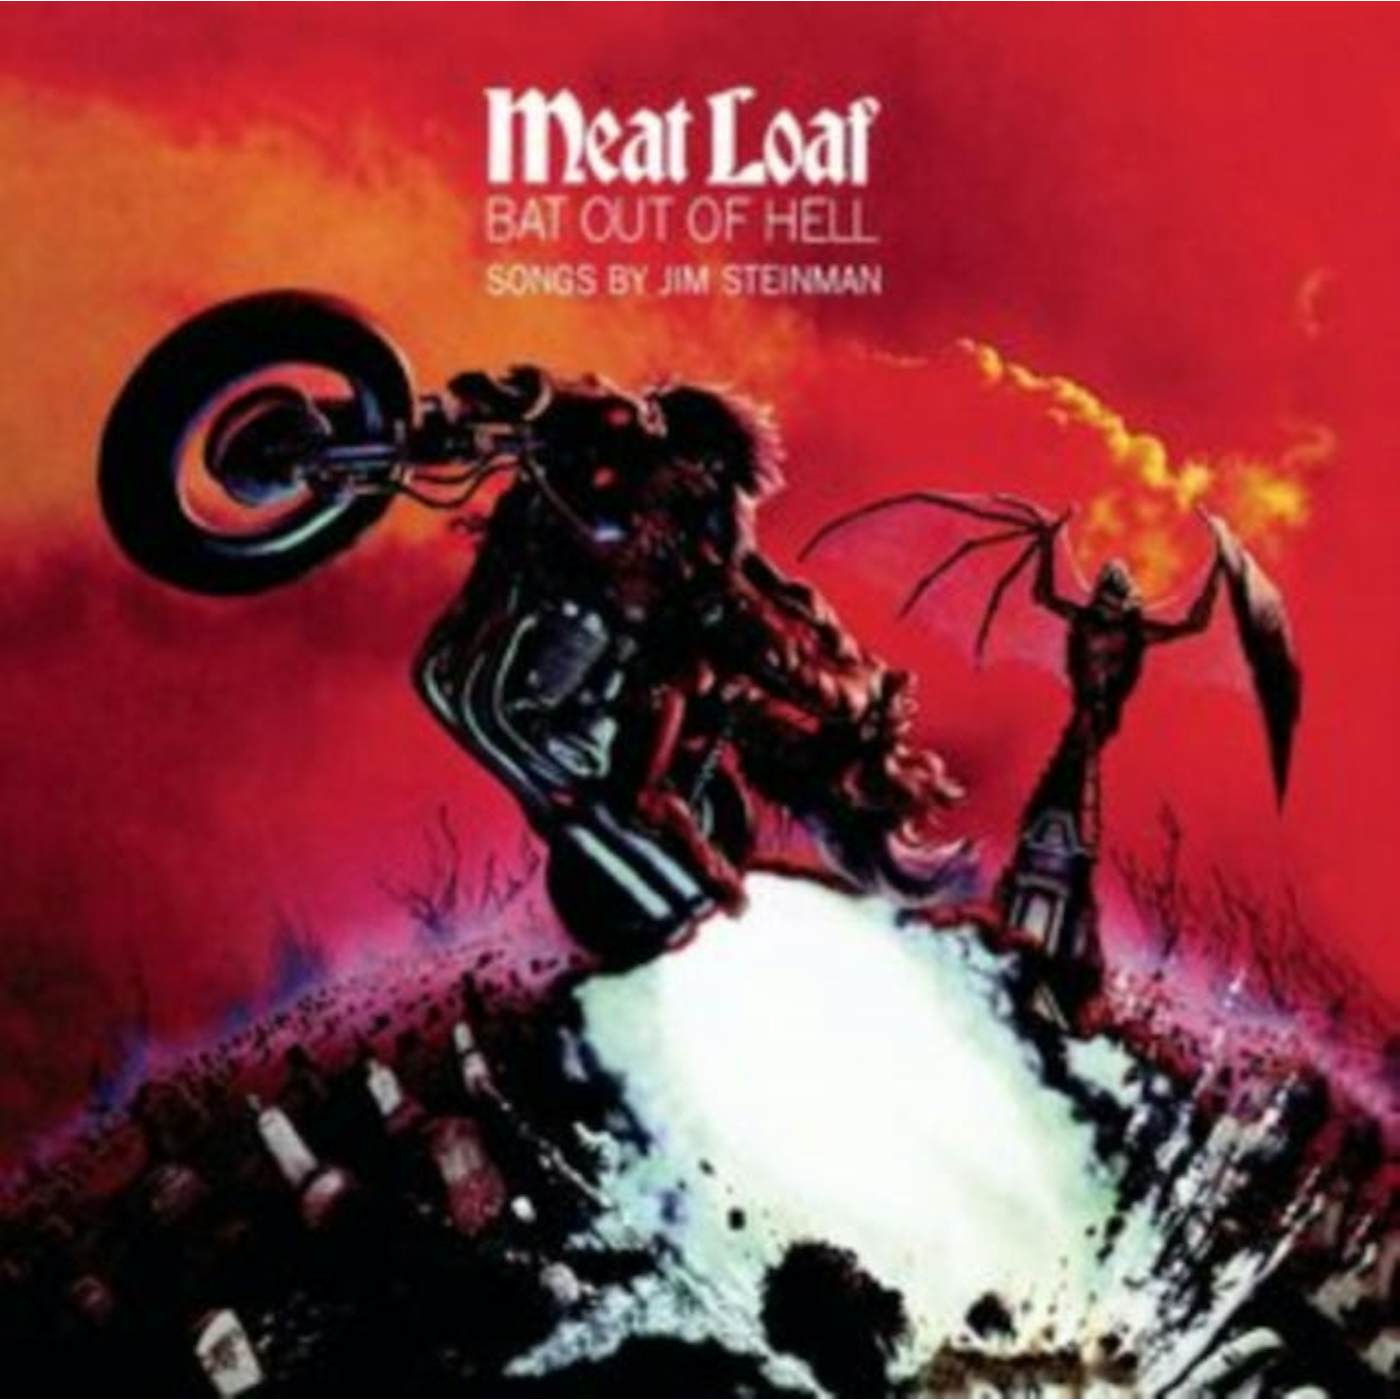 Meat Loaf LP Vinyl Record - Bat Out Of Hell 'Clear Classic' Version (Transparent Vinyl)